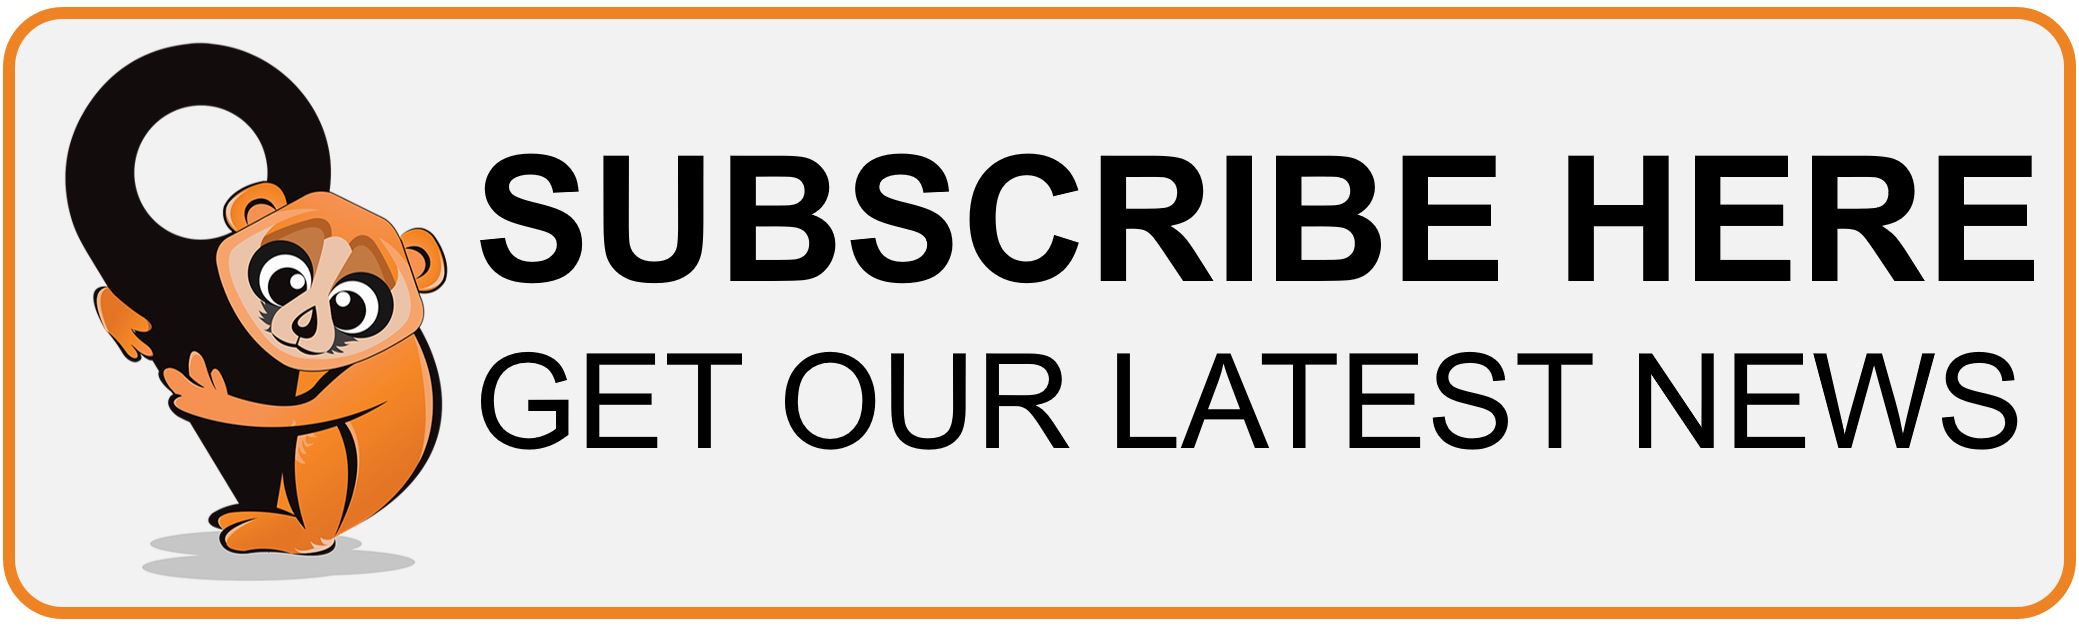 Subscribe here